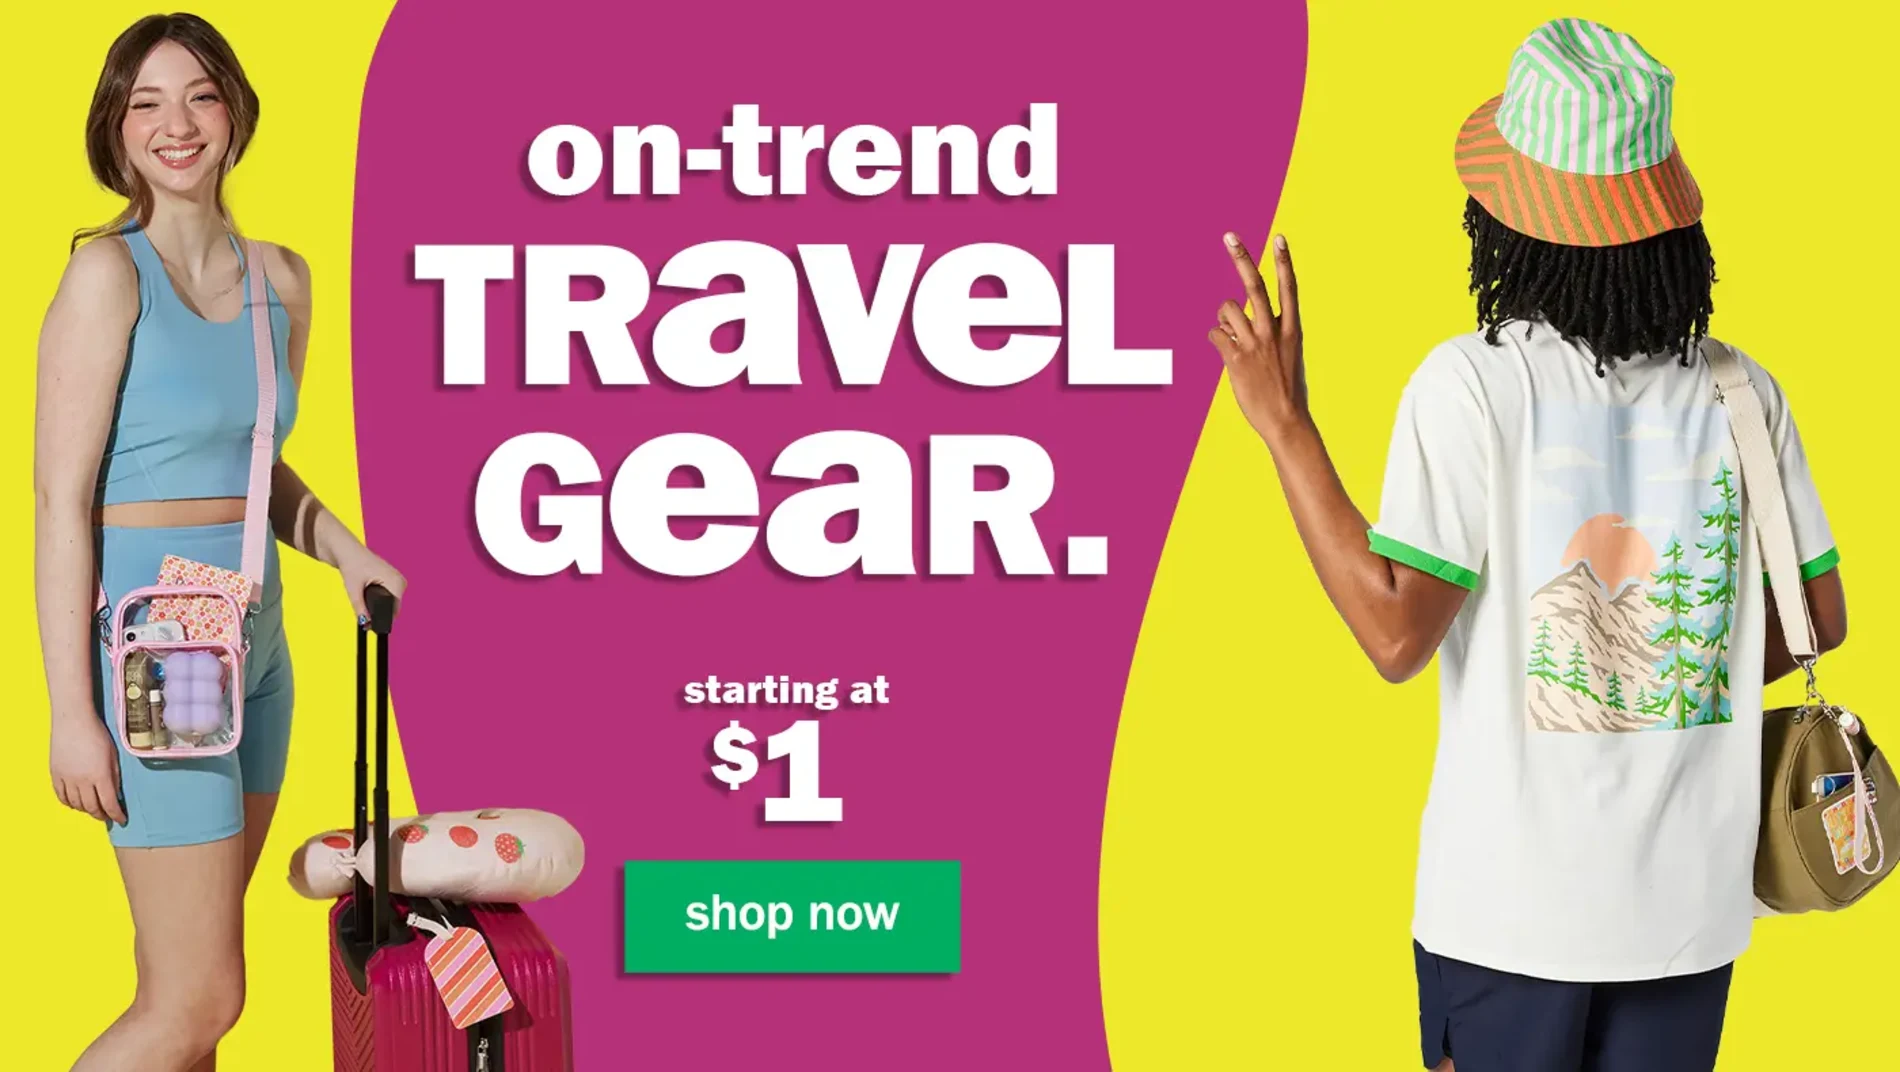 On-Trend Travel Gear. Starting at $1. Shop Now.